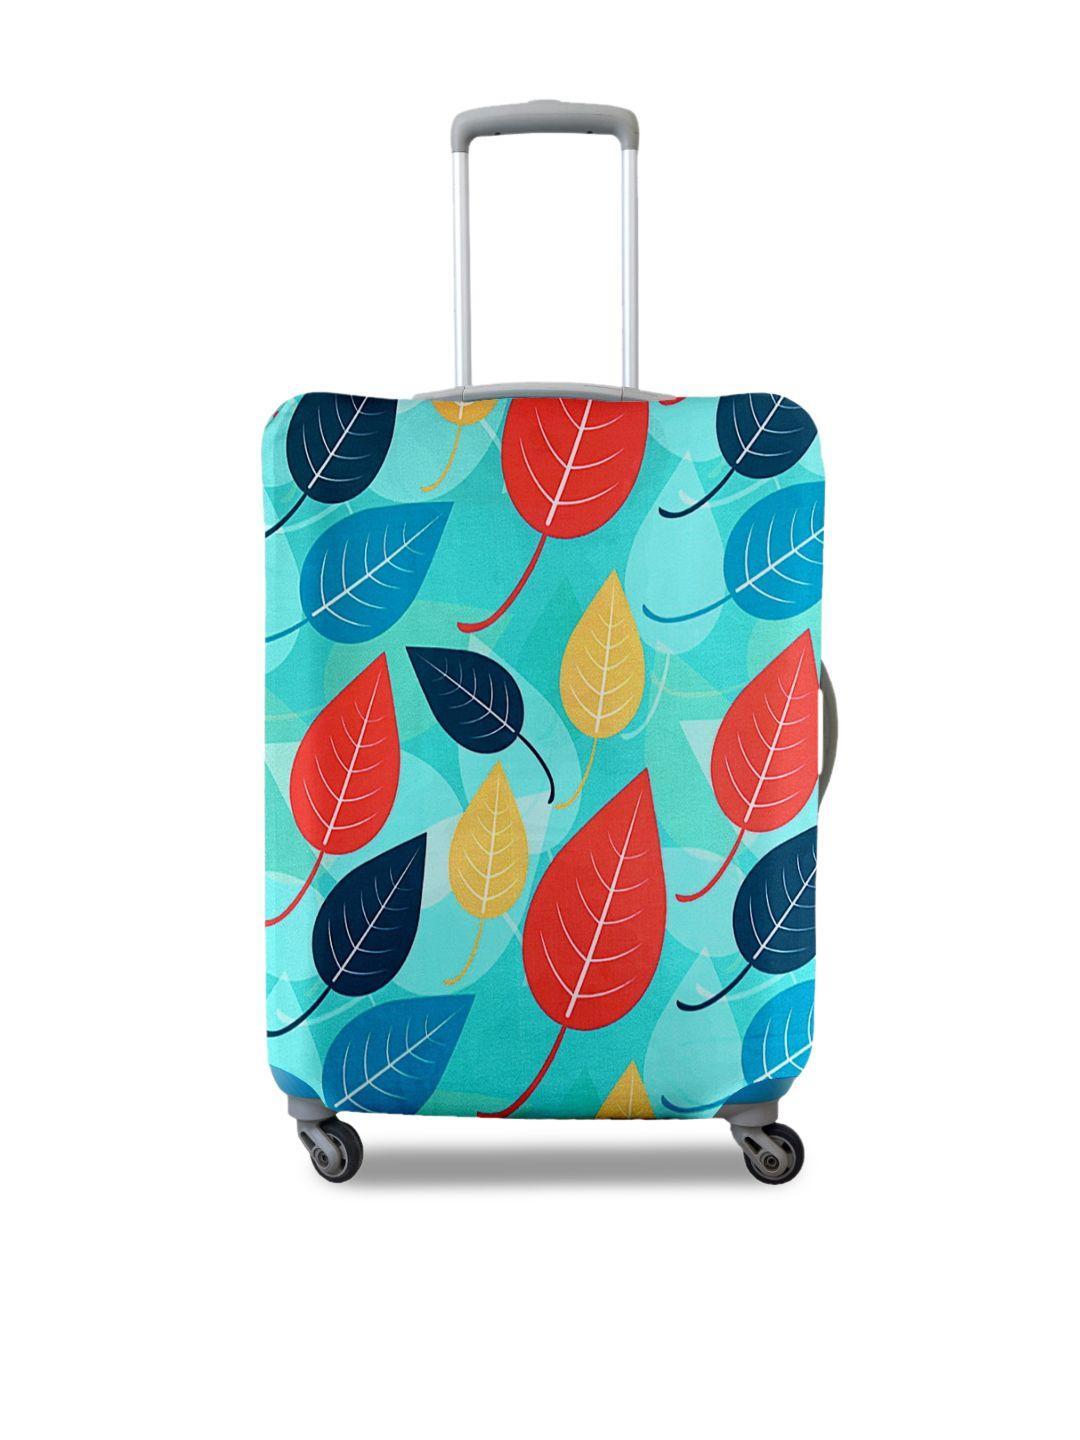 cortina-turquoise-printed-protective-medium-trolley-bag-cover